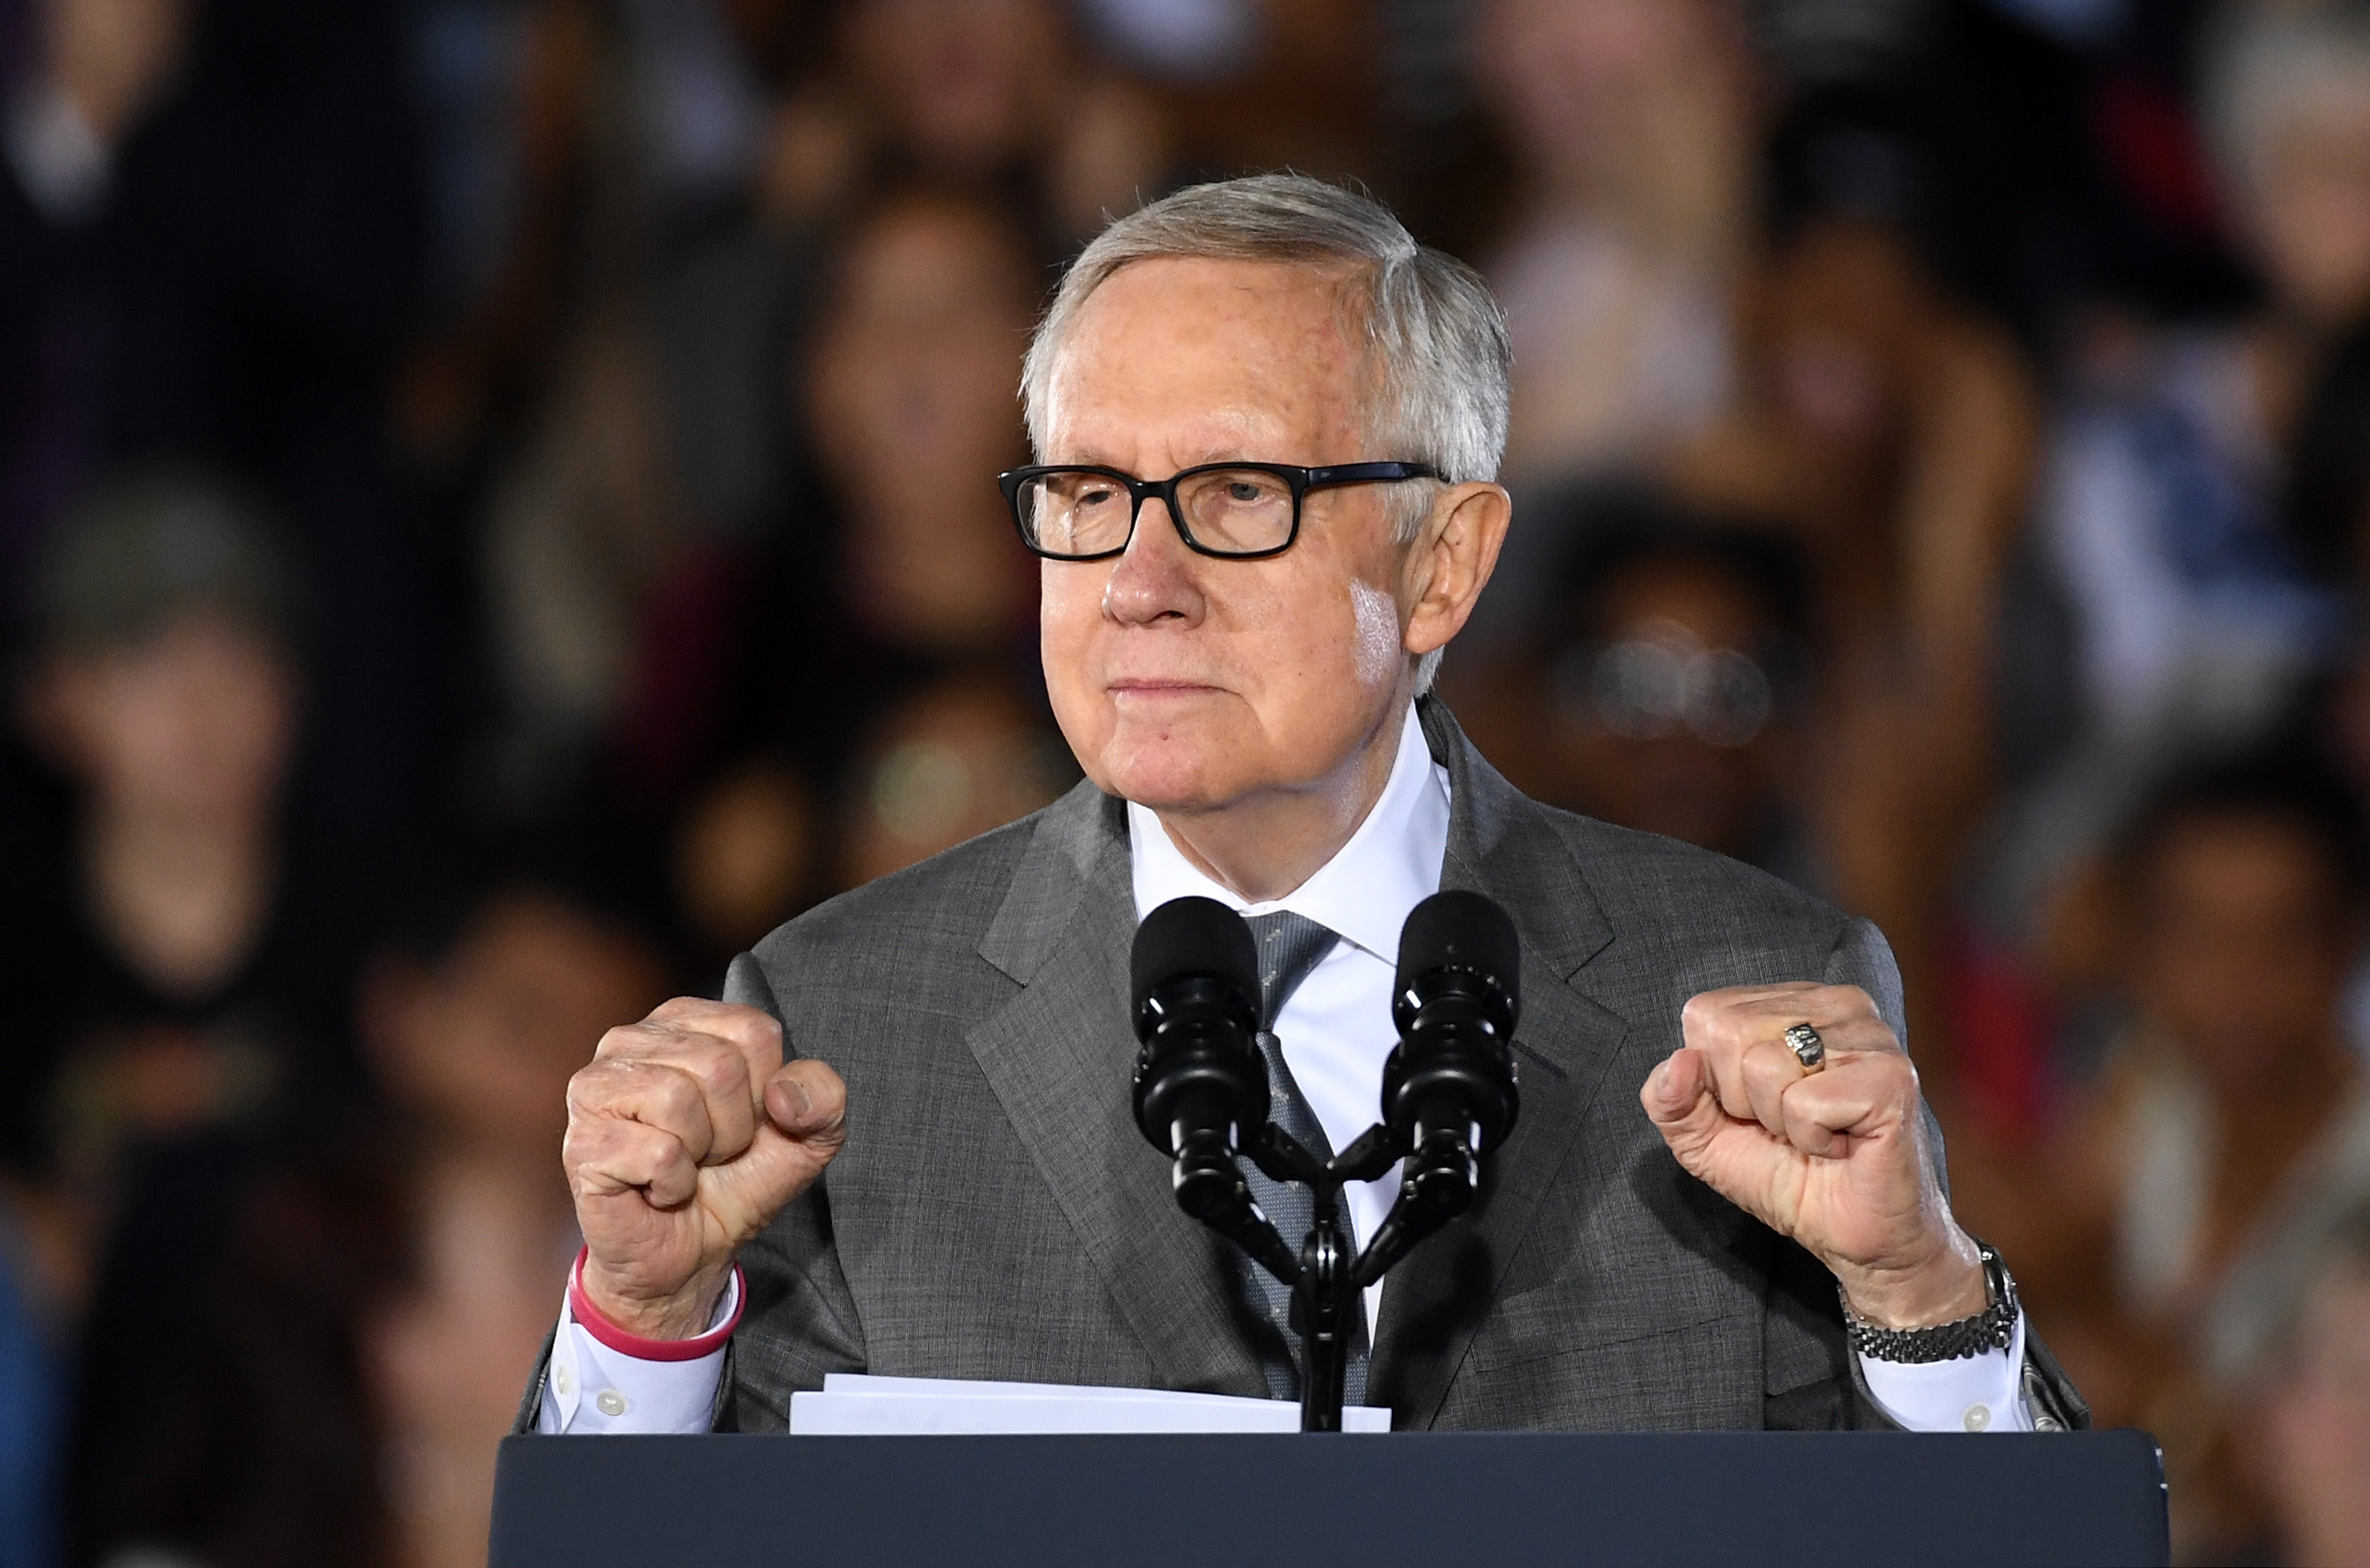 Harry Reid campaigns for Hillary Clinton in 2016